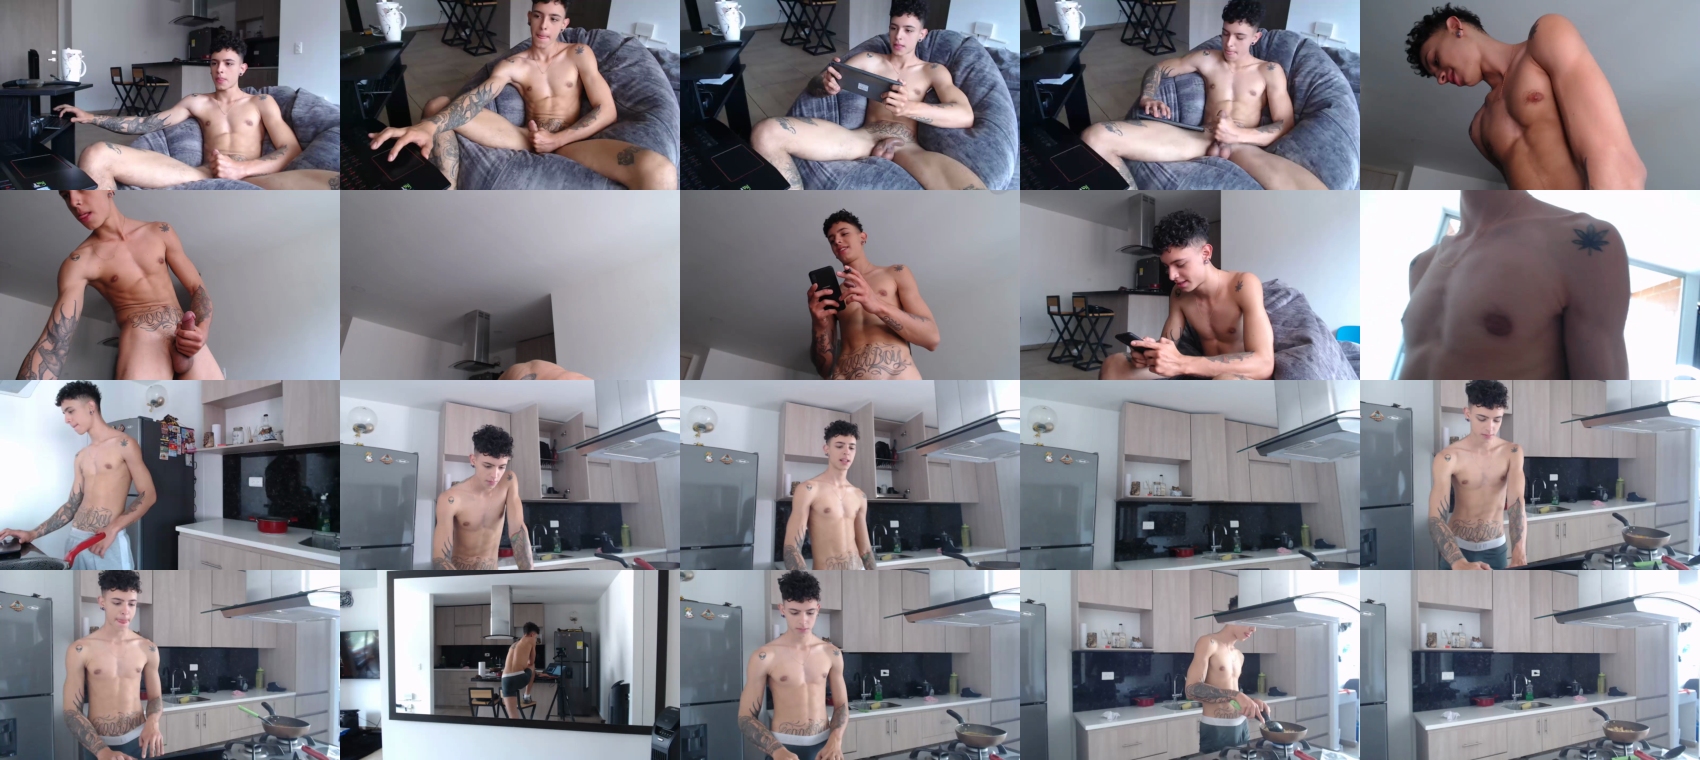 aron_ford Recorded CAM SHOW @ Chaturbate 22-01-2022